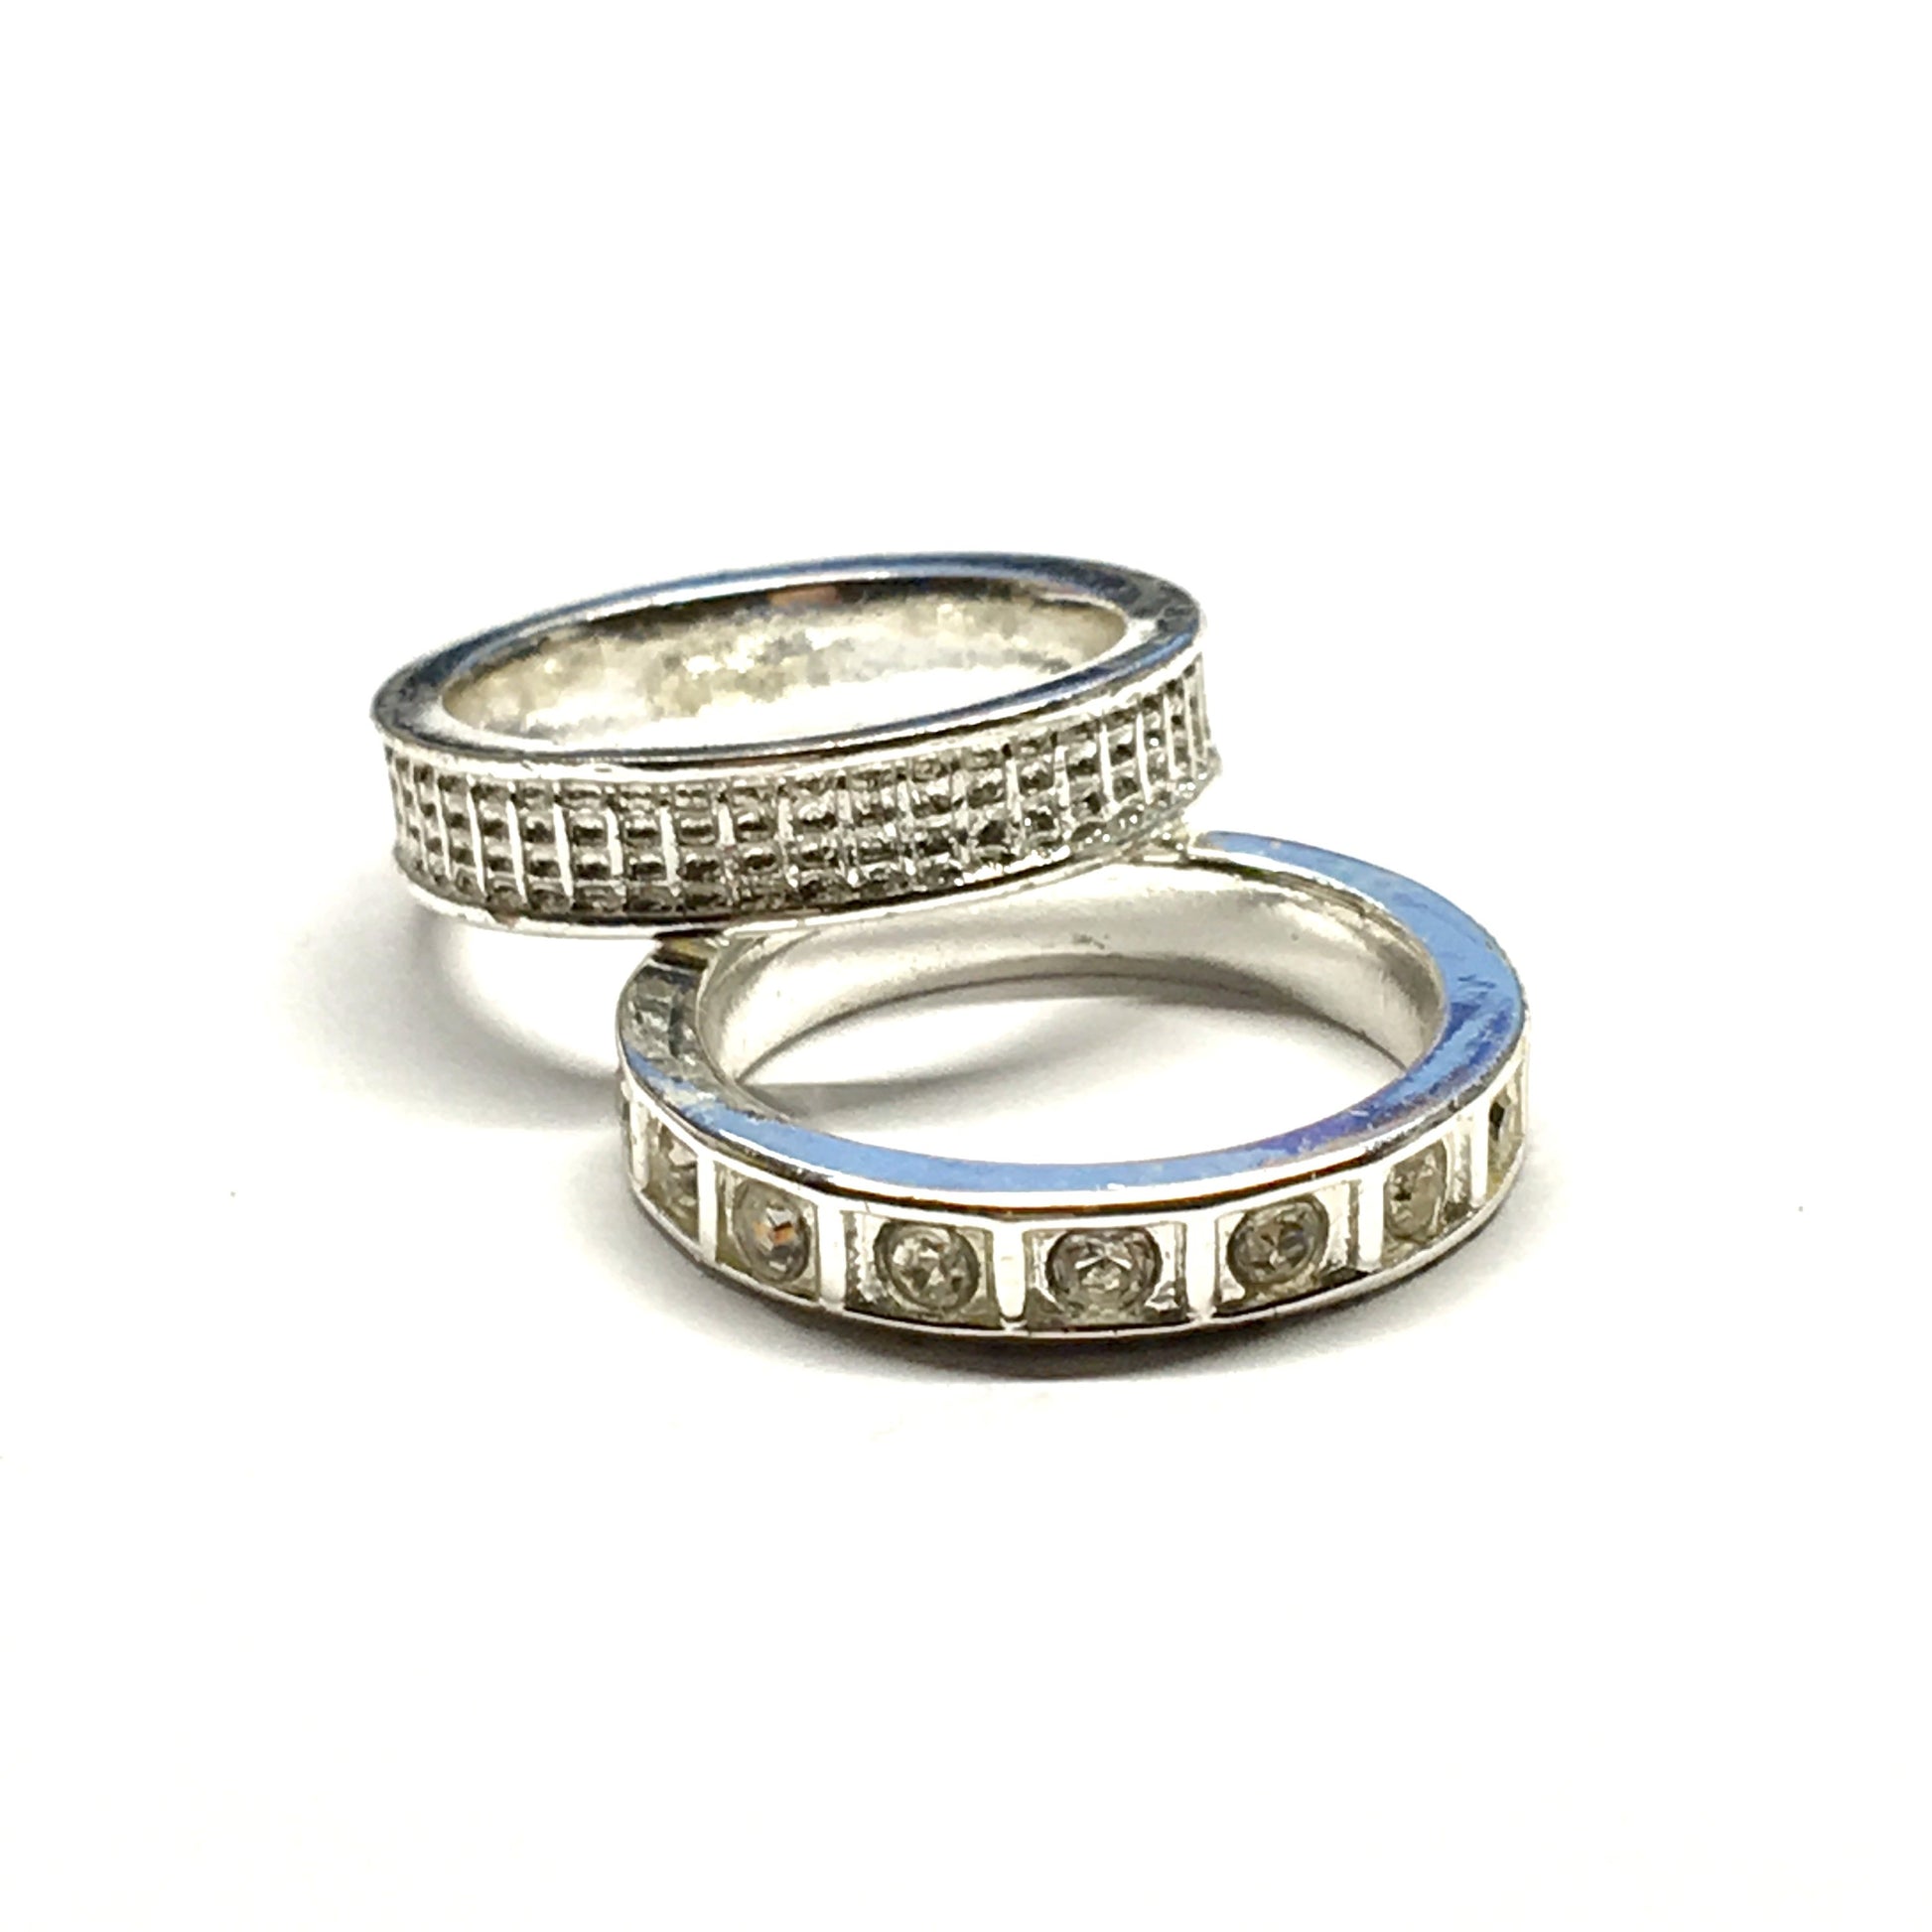 Used Jewelry - Womens set of 2 Silver Shimmery Rhinestone Stacking Band Ring